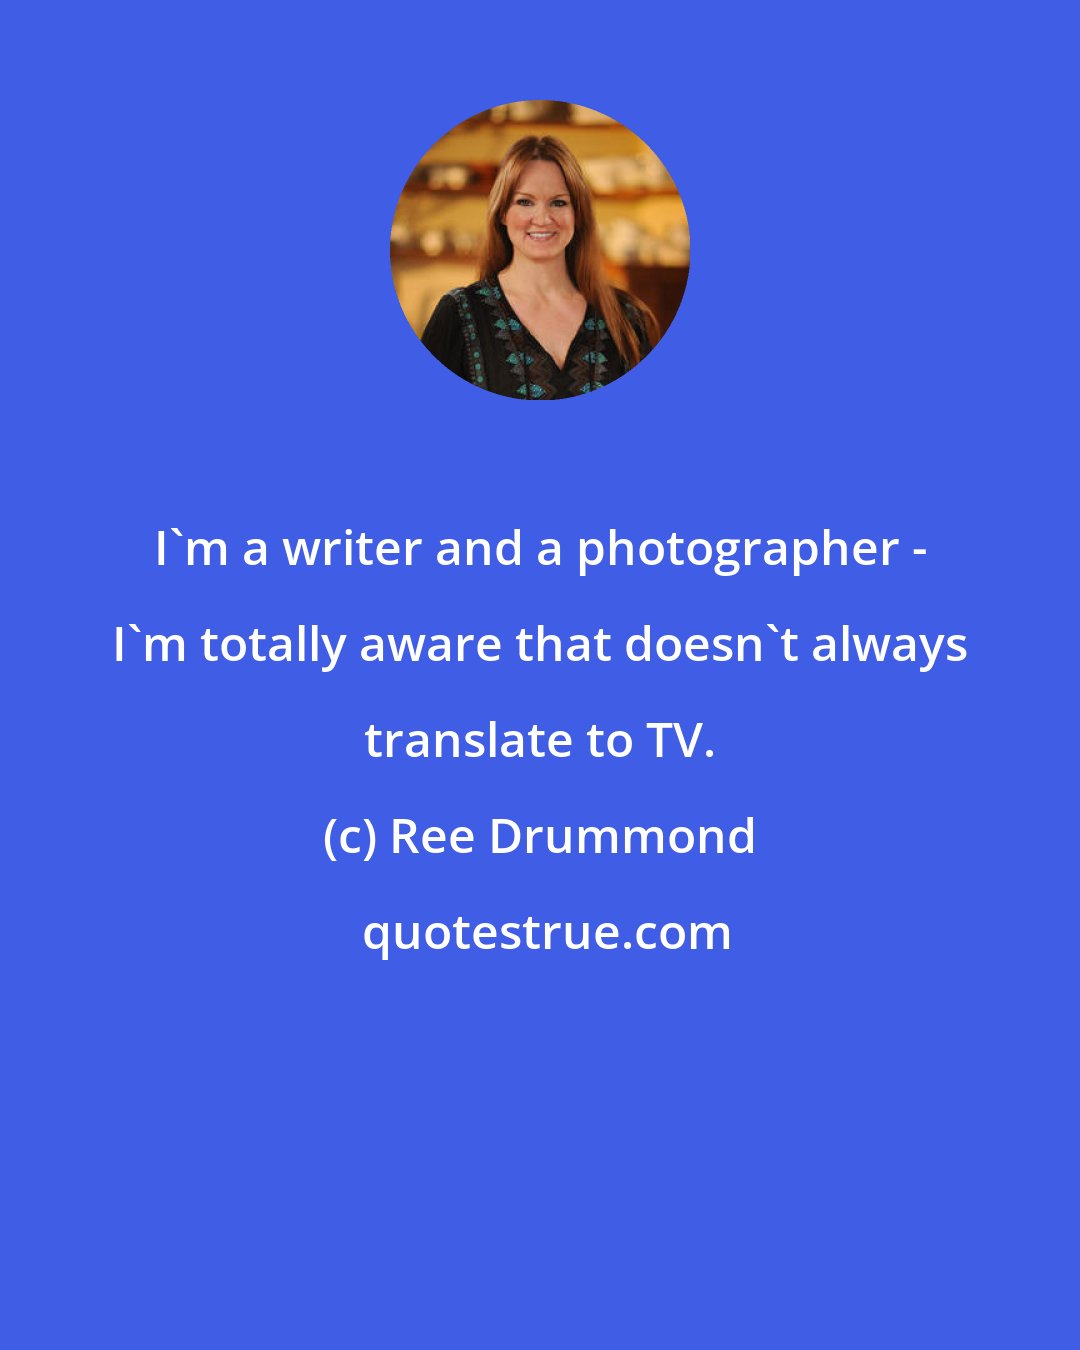 Ree Drummond: I'm a writer and a photographer - I'm totally aware that doesn't always translate to TV.